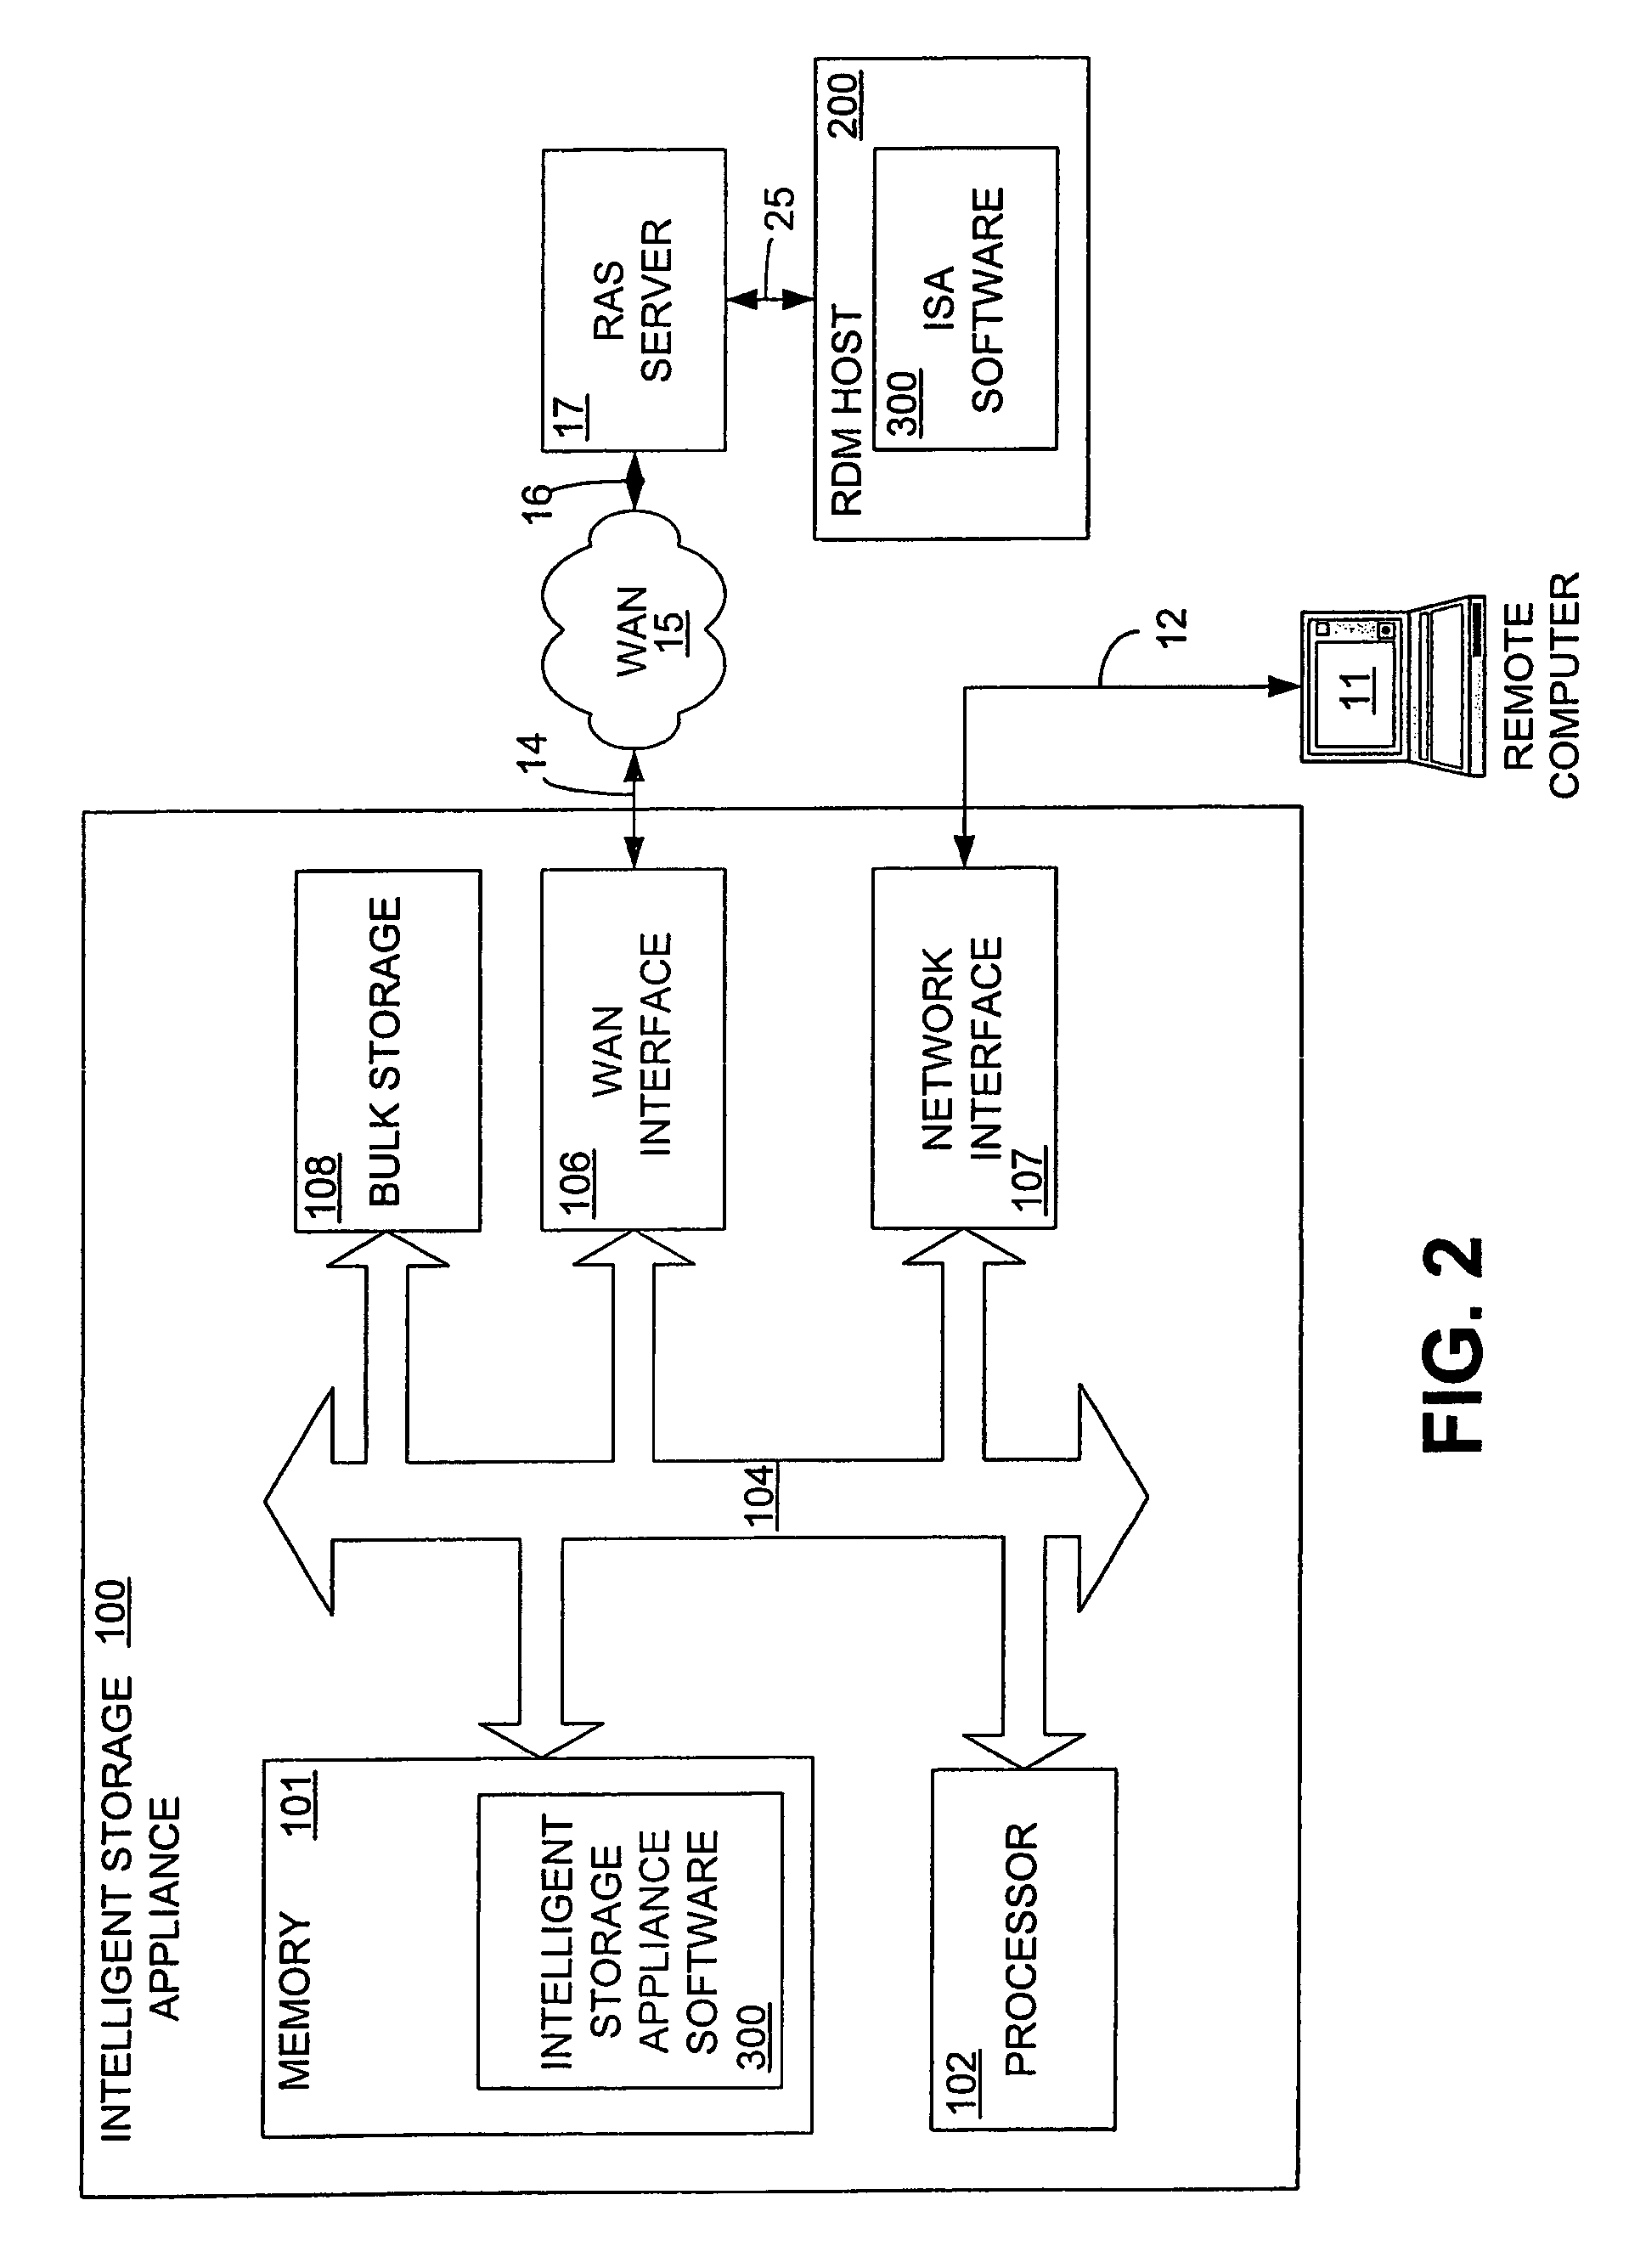 Method and system for transparent file proxying